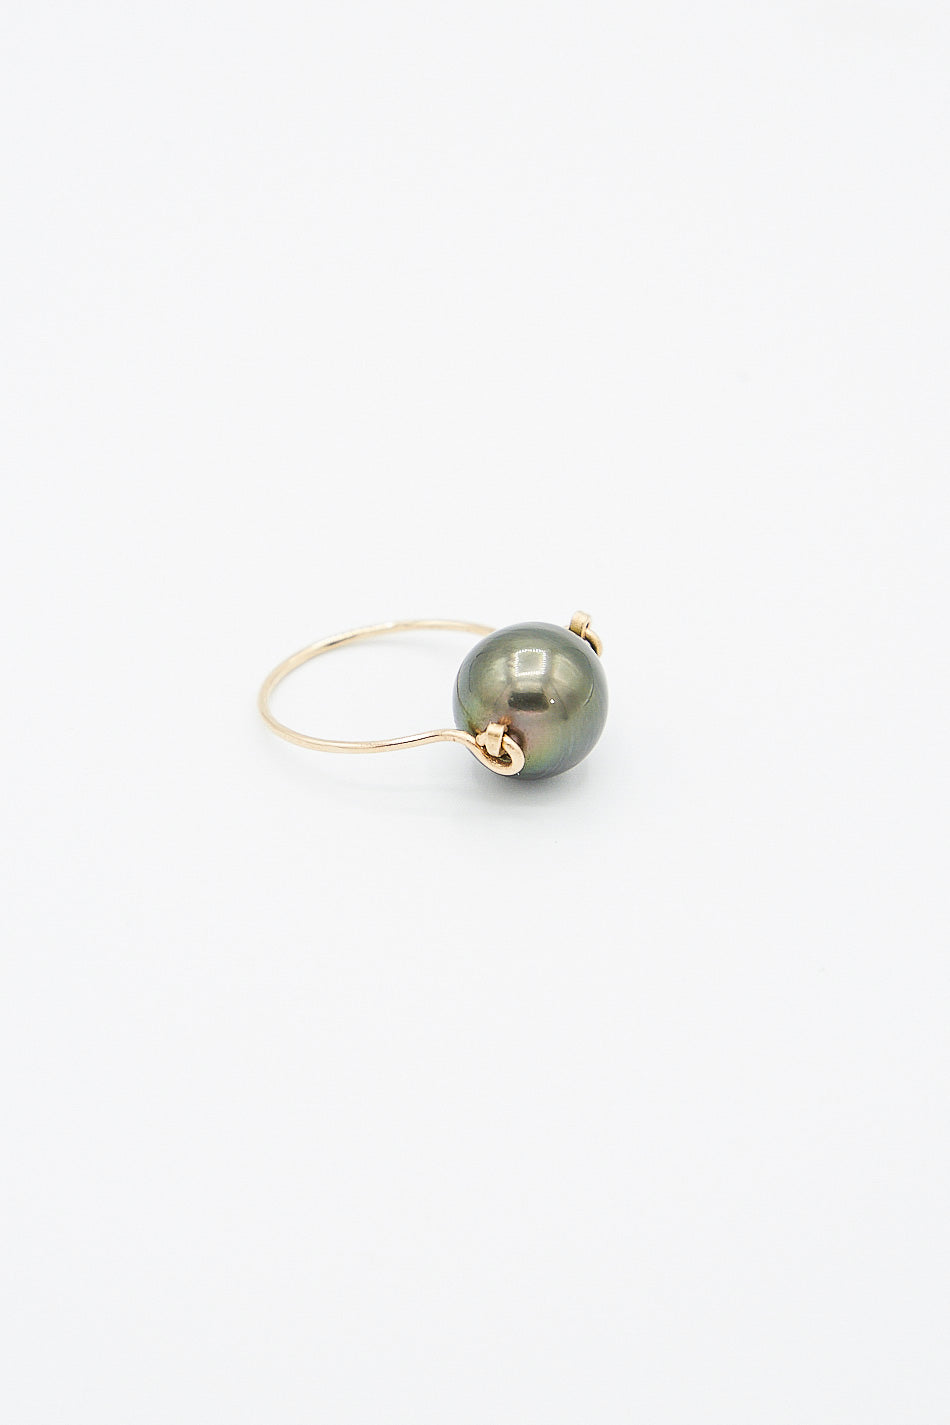 A 14K Ring in Tahitian Pearl Charcoal by Mary MacGill on a white background.